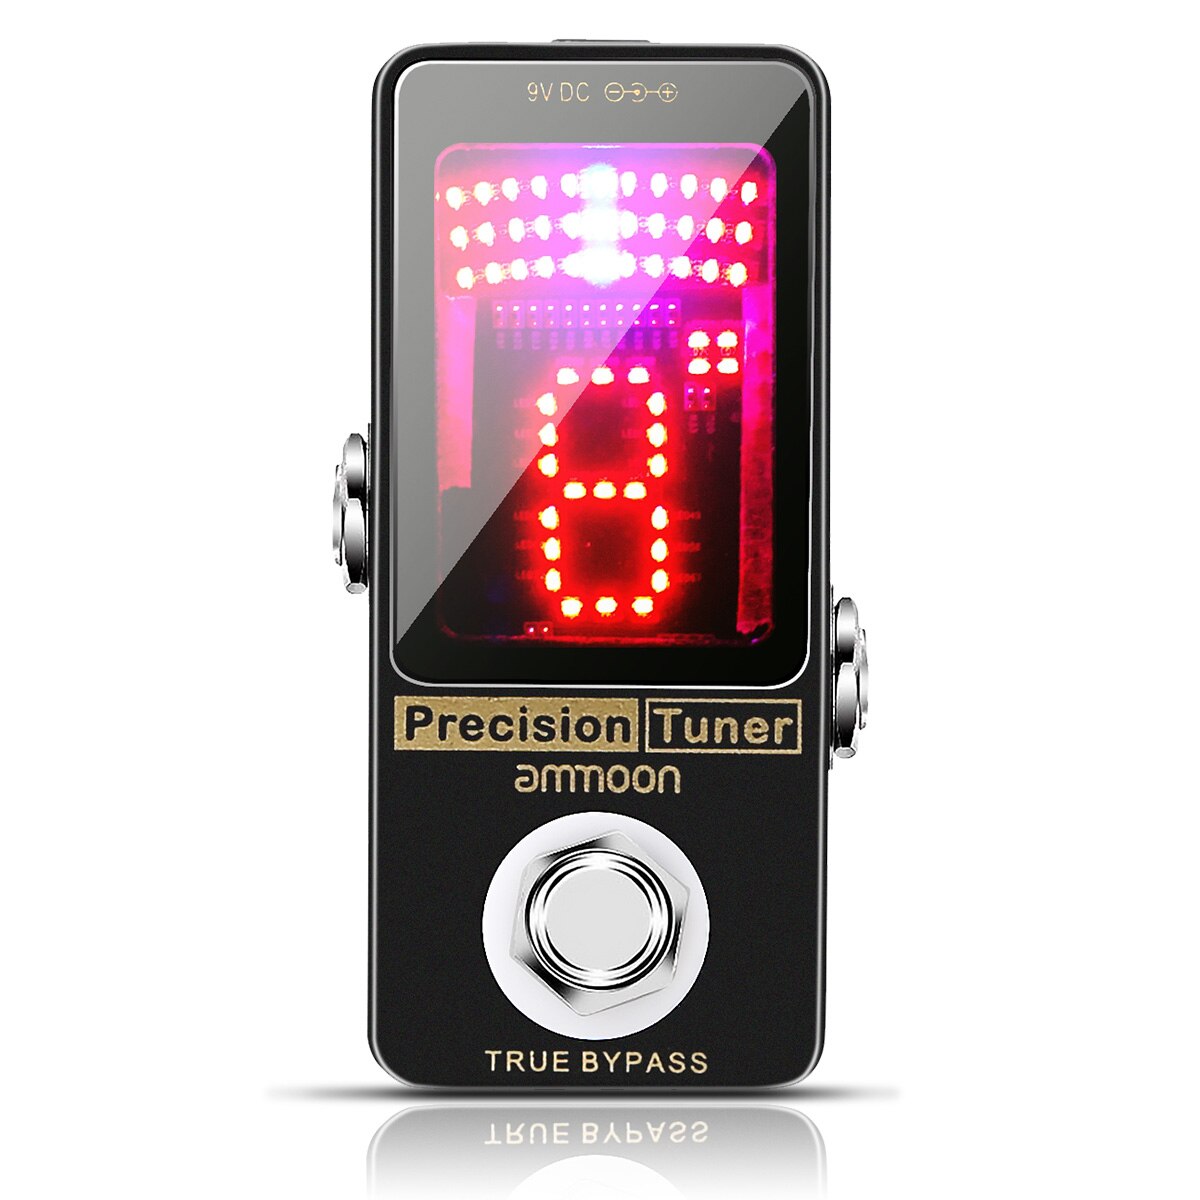 Guitar Tuner Mini Chromatic Tuner Pedal Effect LED Display True Bypass for Guitar Accessories Guitar Bass Musical Instrument